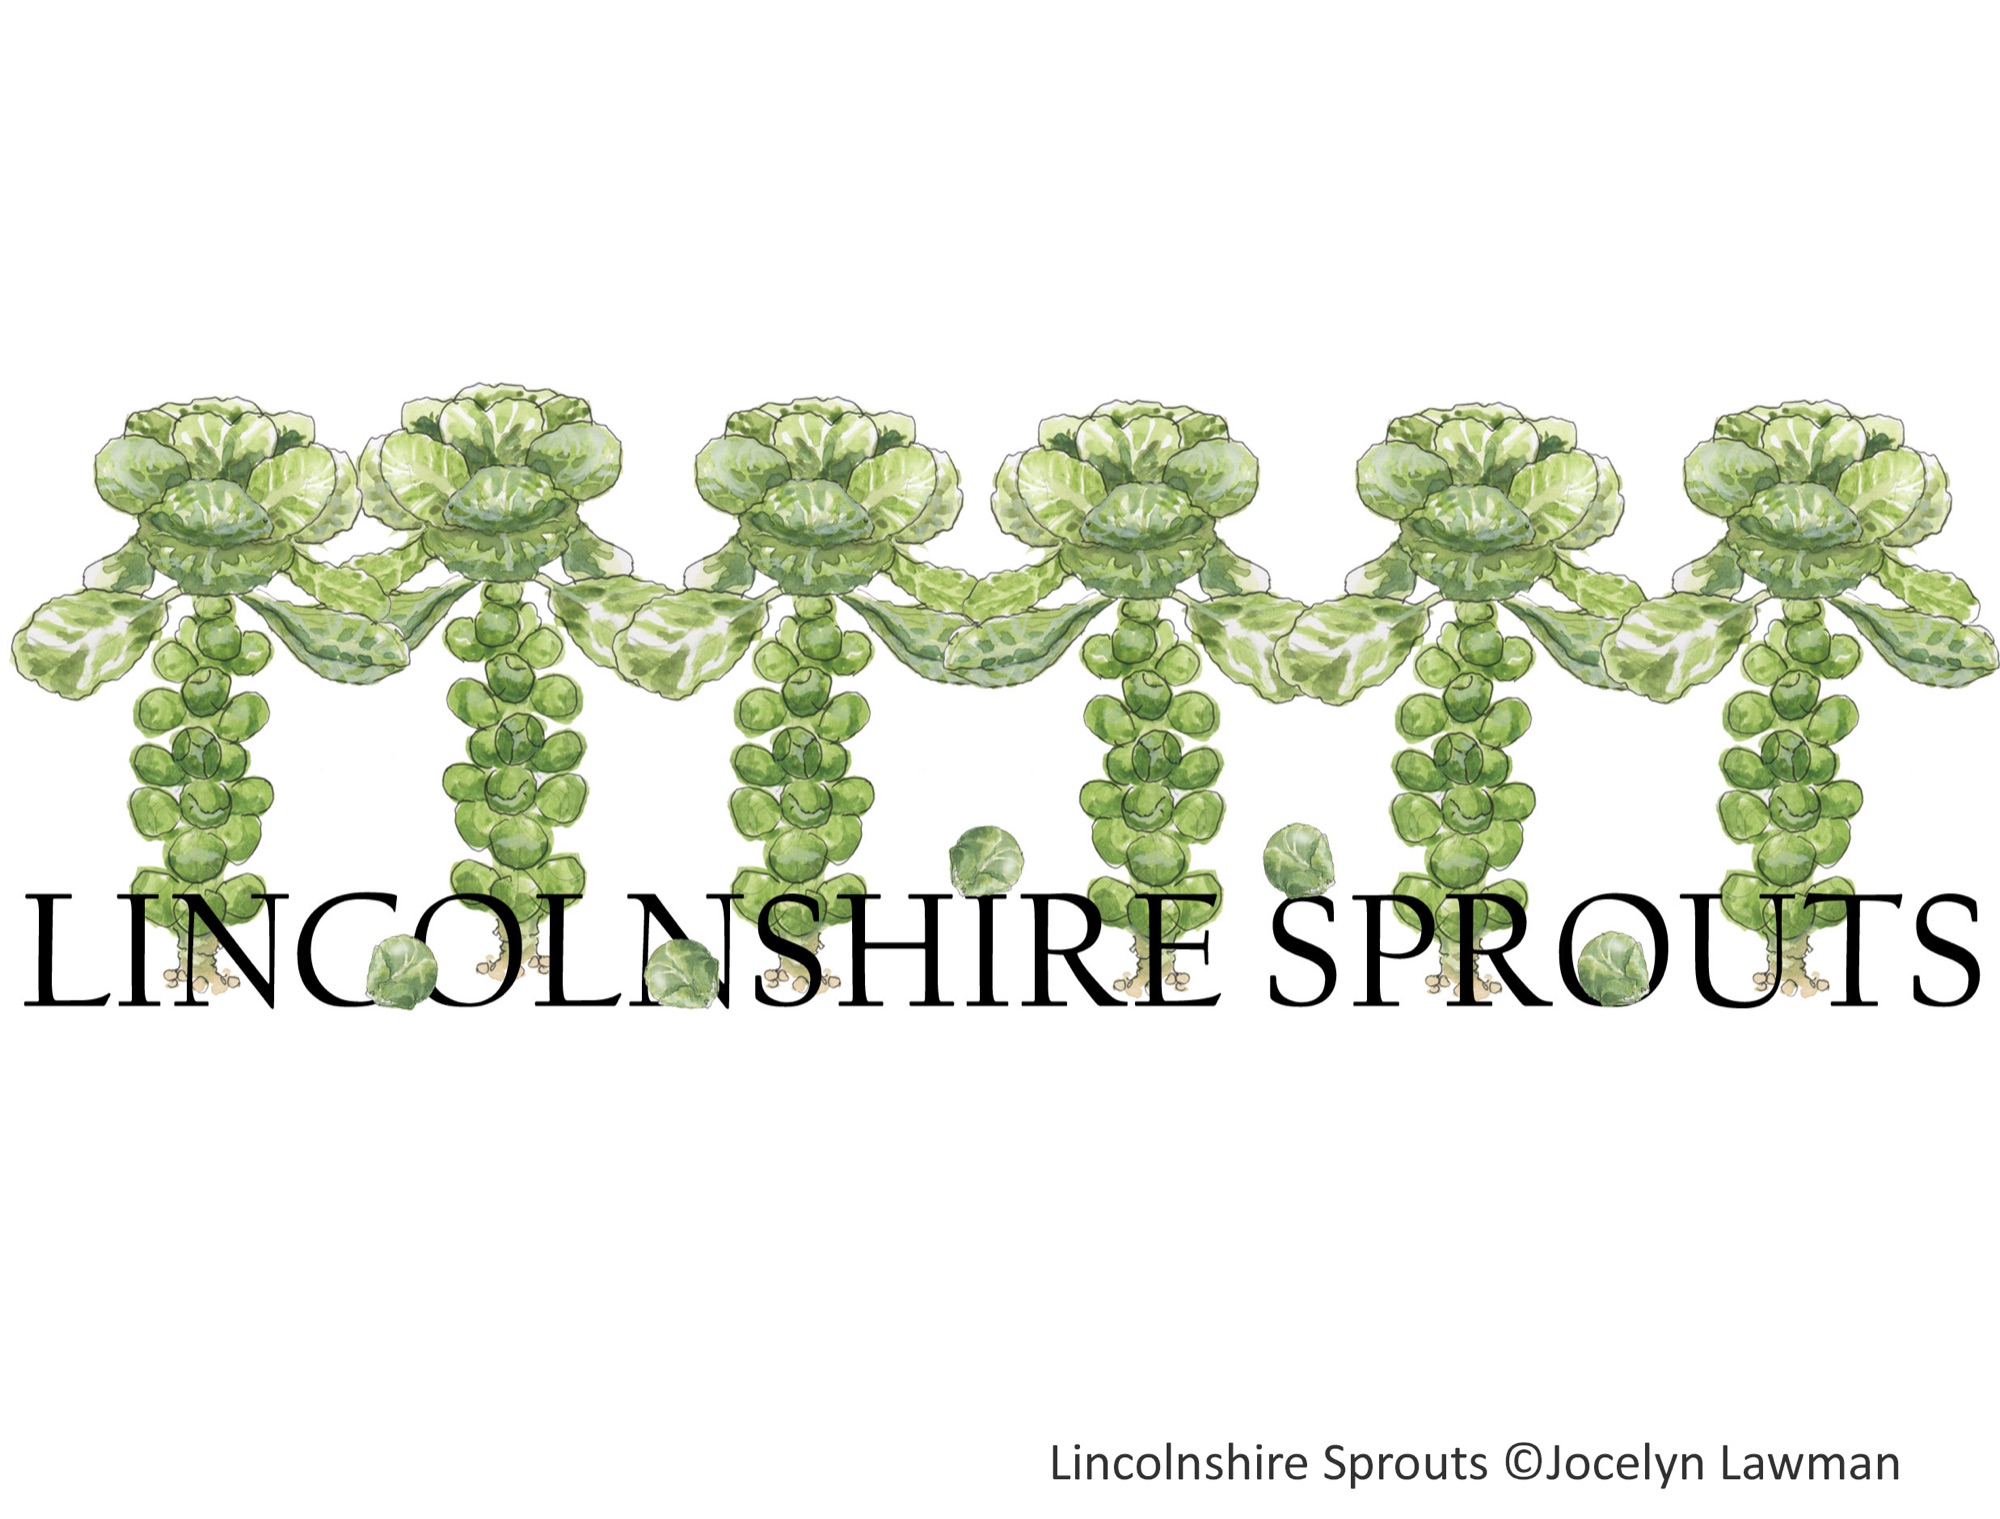 Lincolnshire sprouts copy.jpg